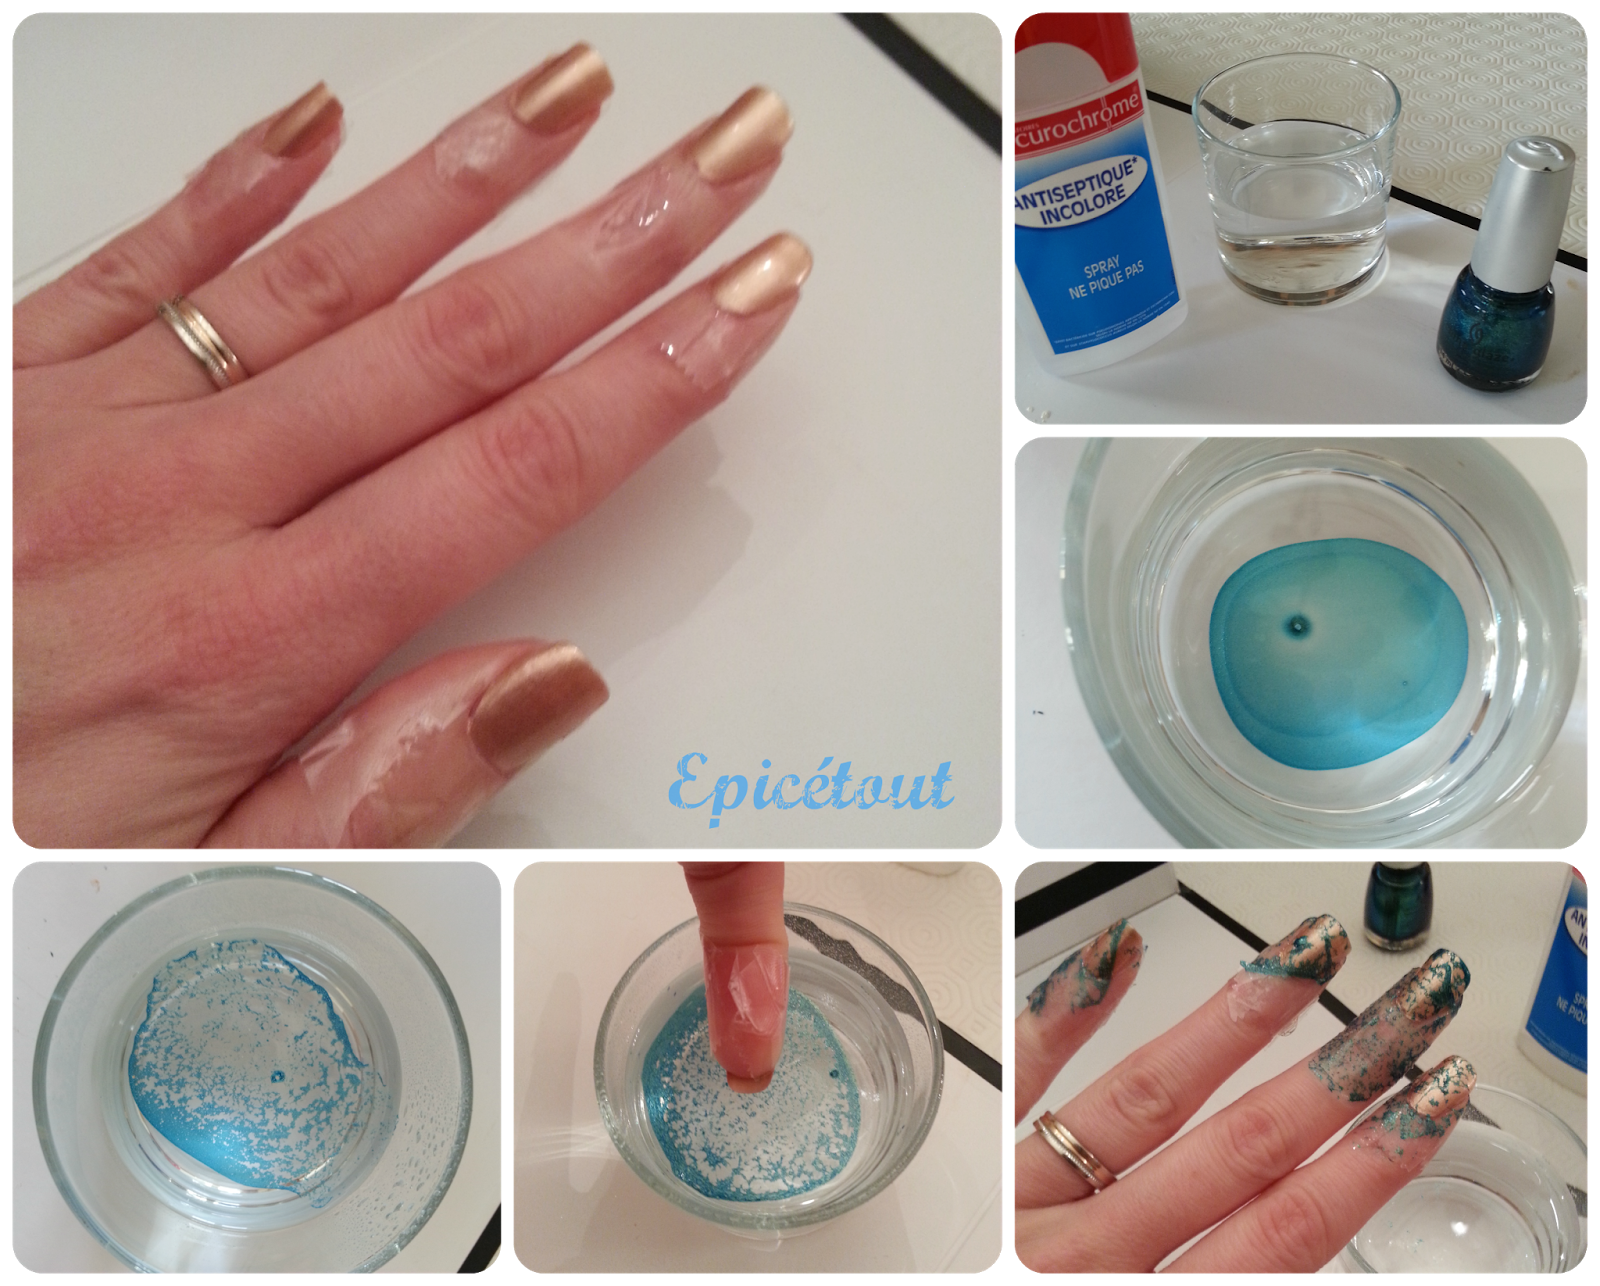 1. "Easy Nail Art with Clear Polish" - wide 5